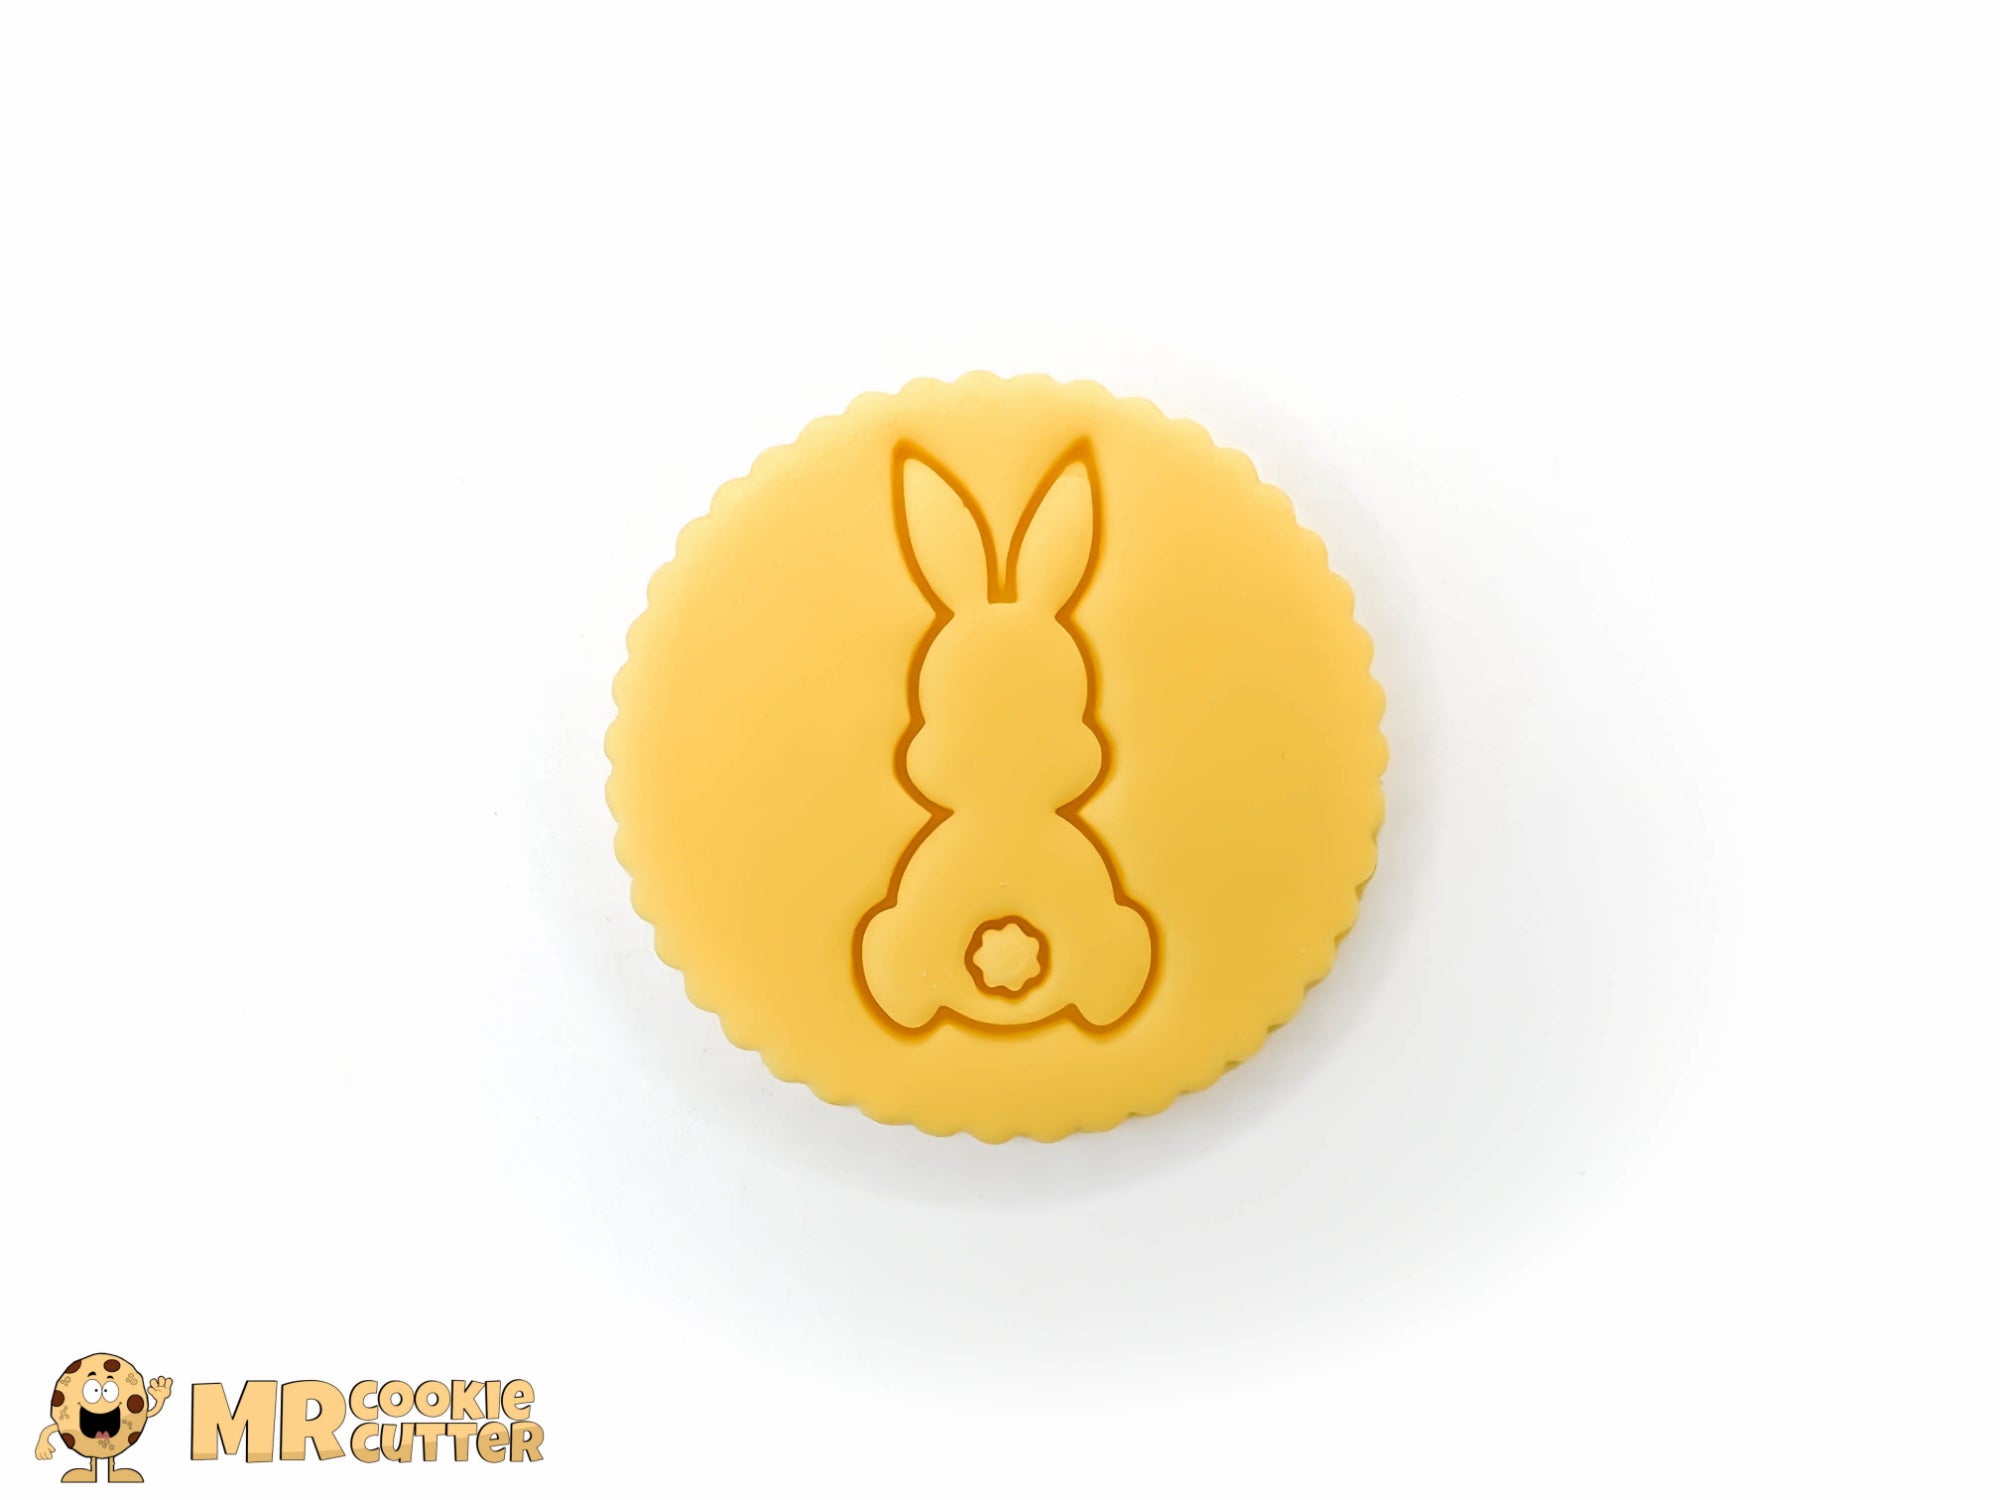 Easter Bunny Cupcake Topper